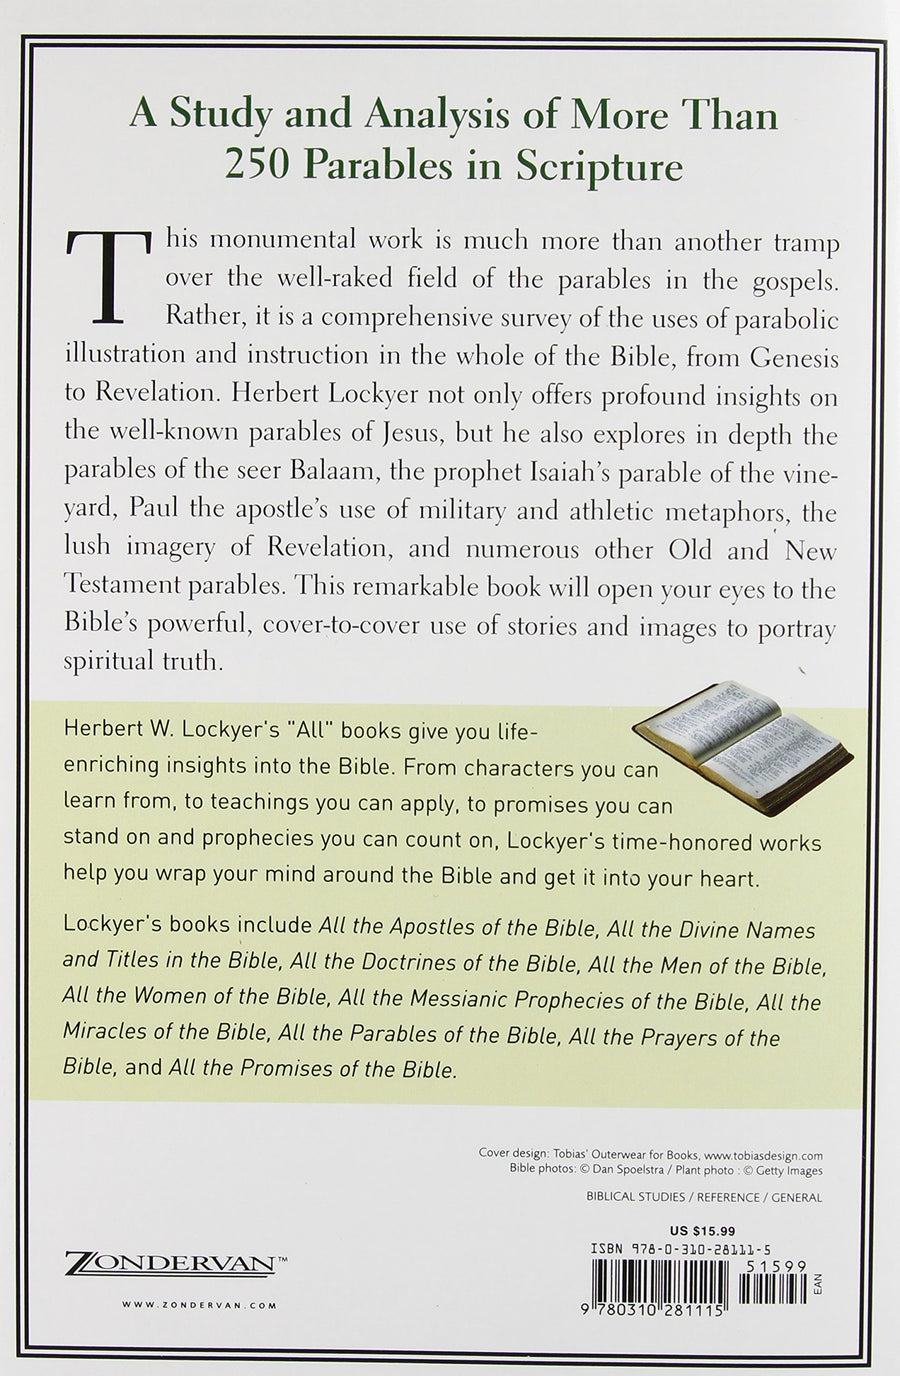 All the Parables of the Bible - Herbert Lockyer